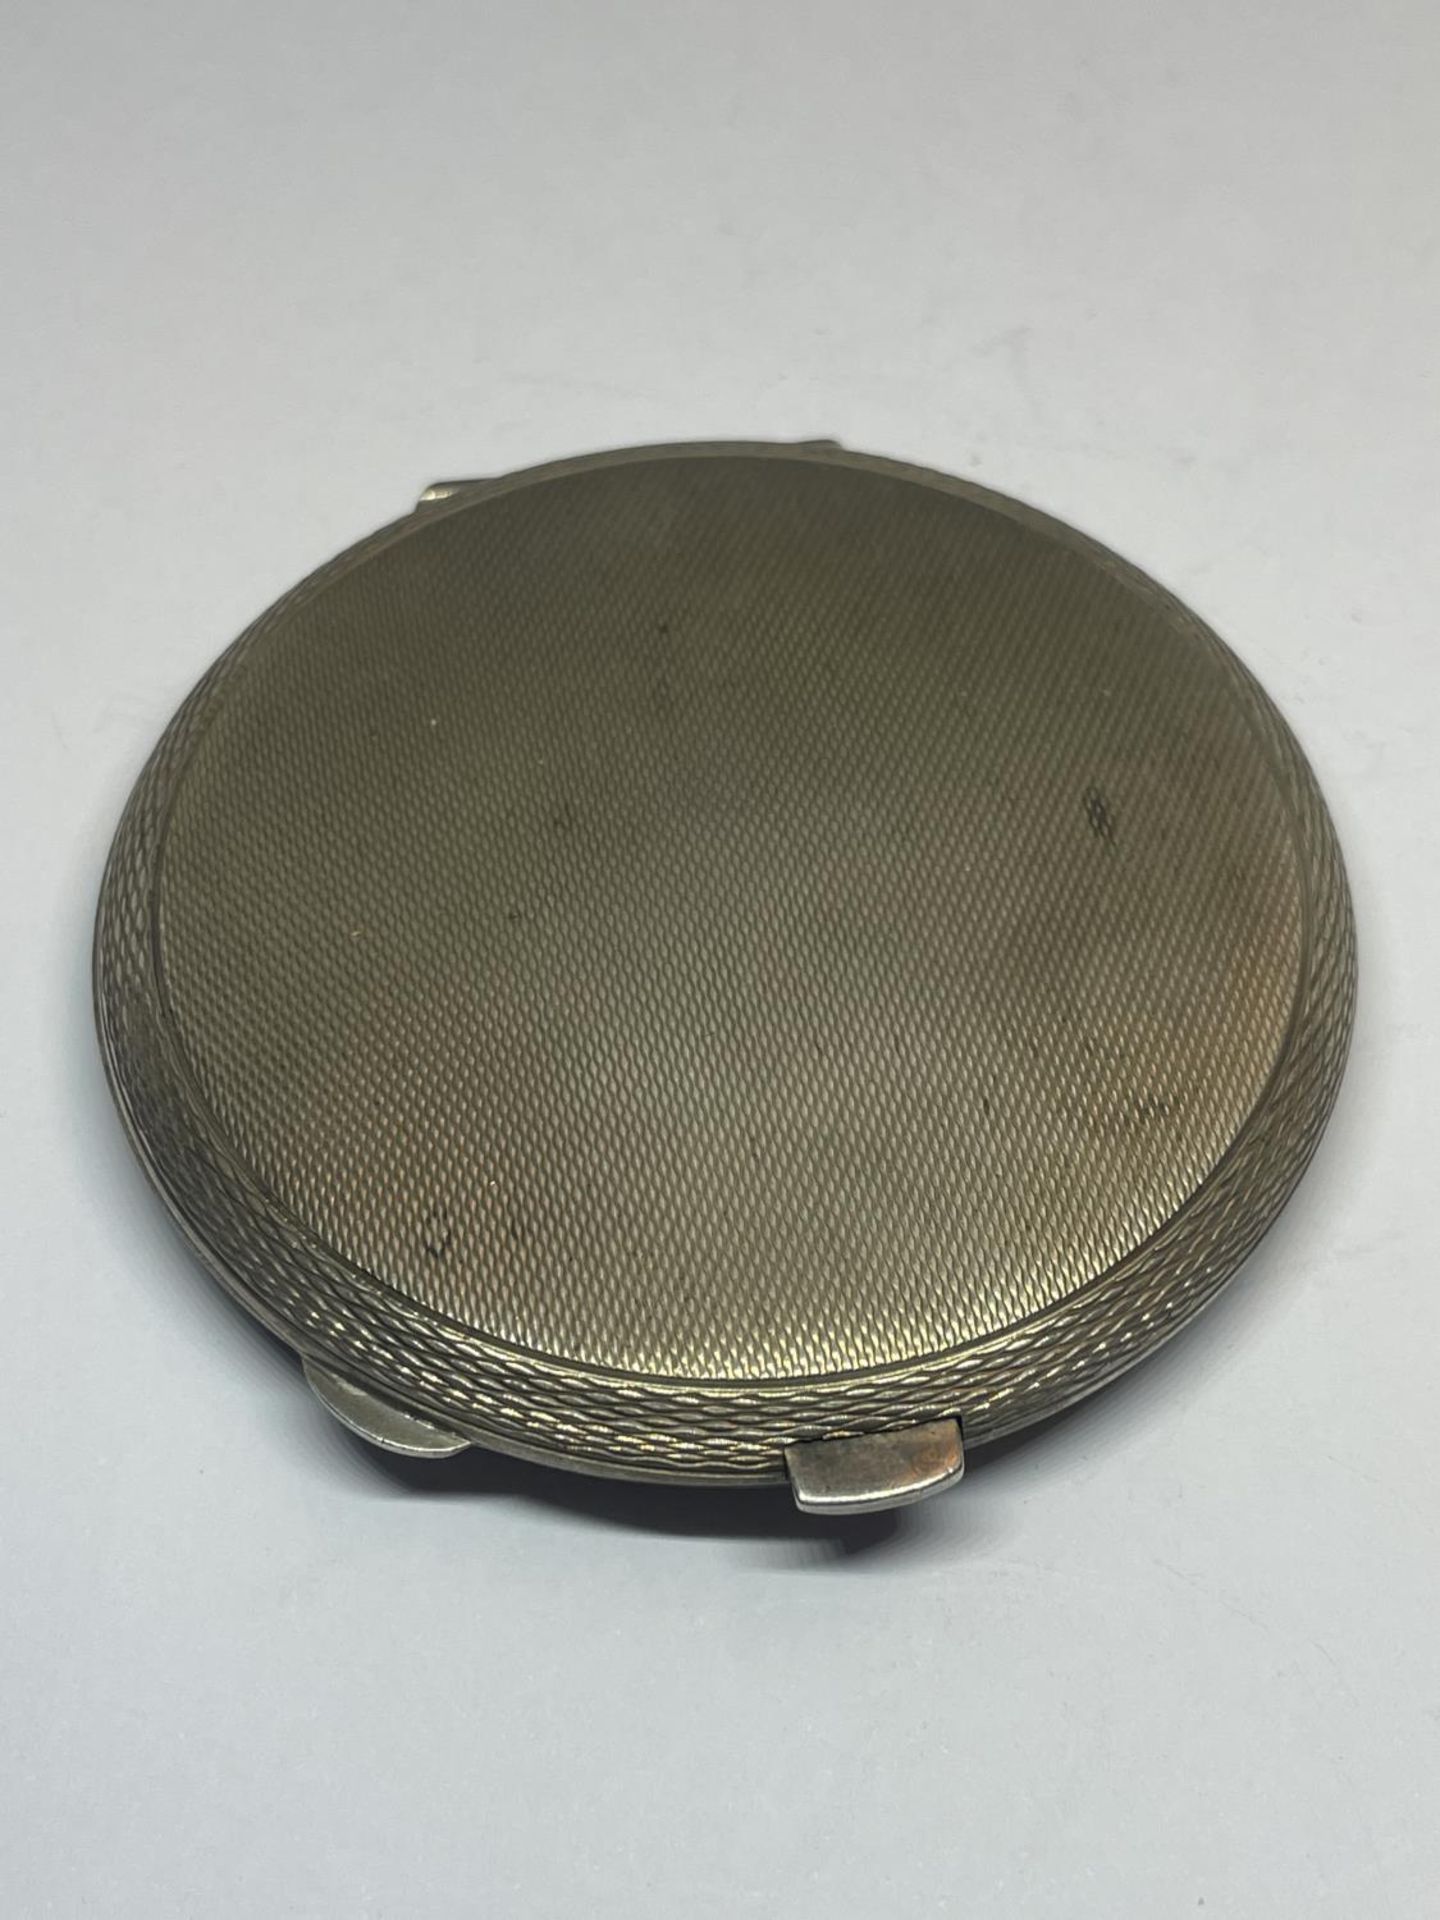 A HALLMARKED BIRMINGHAM SILVER COMPACT - Image 2 of 5